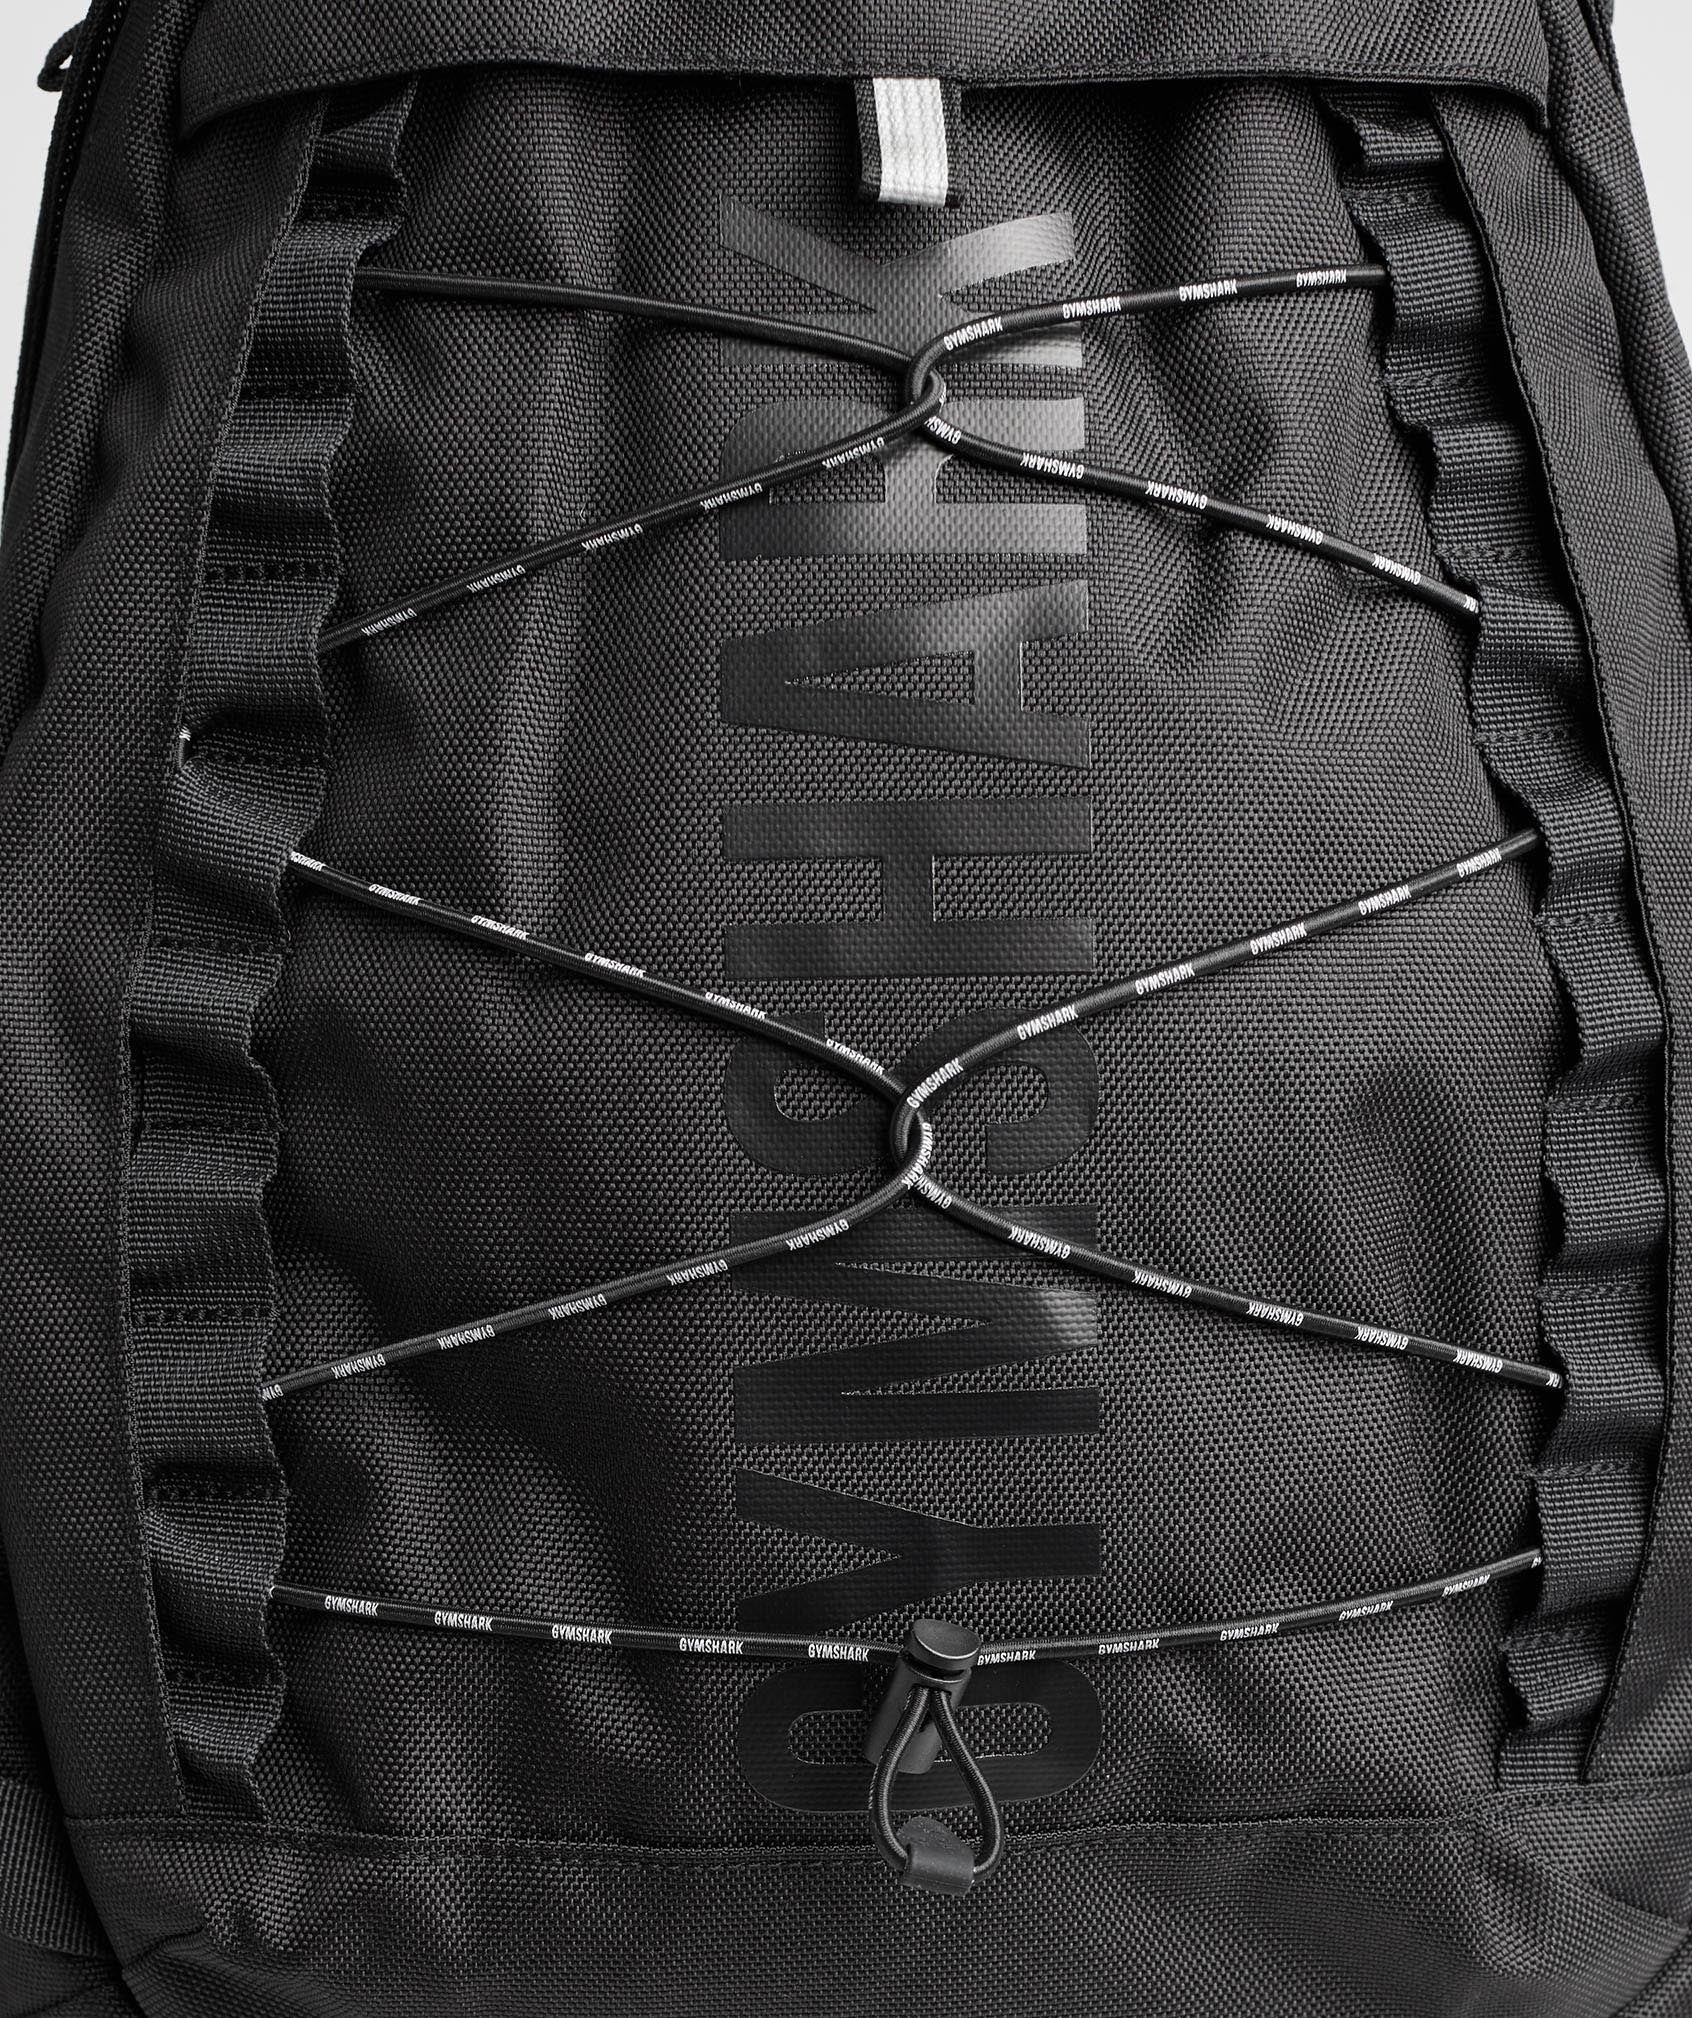 Pursuit Backpack in Black - view 6